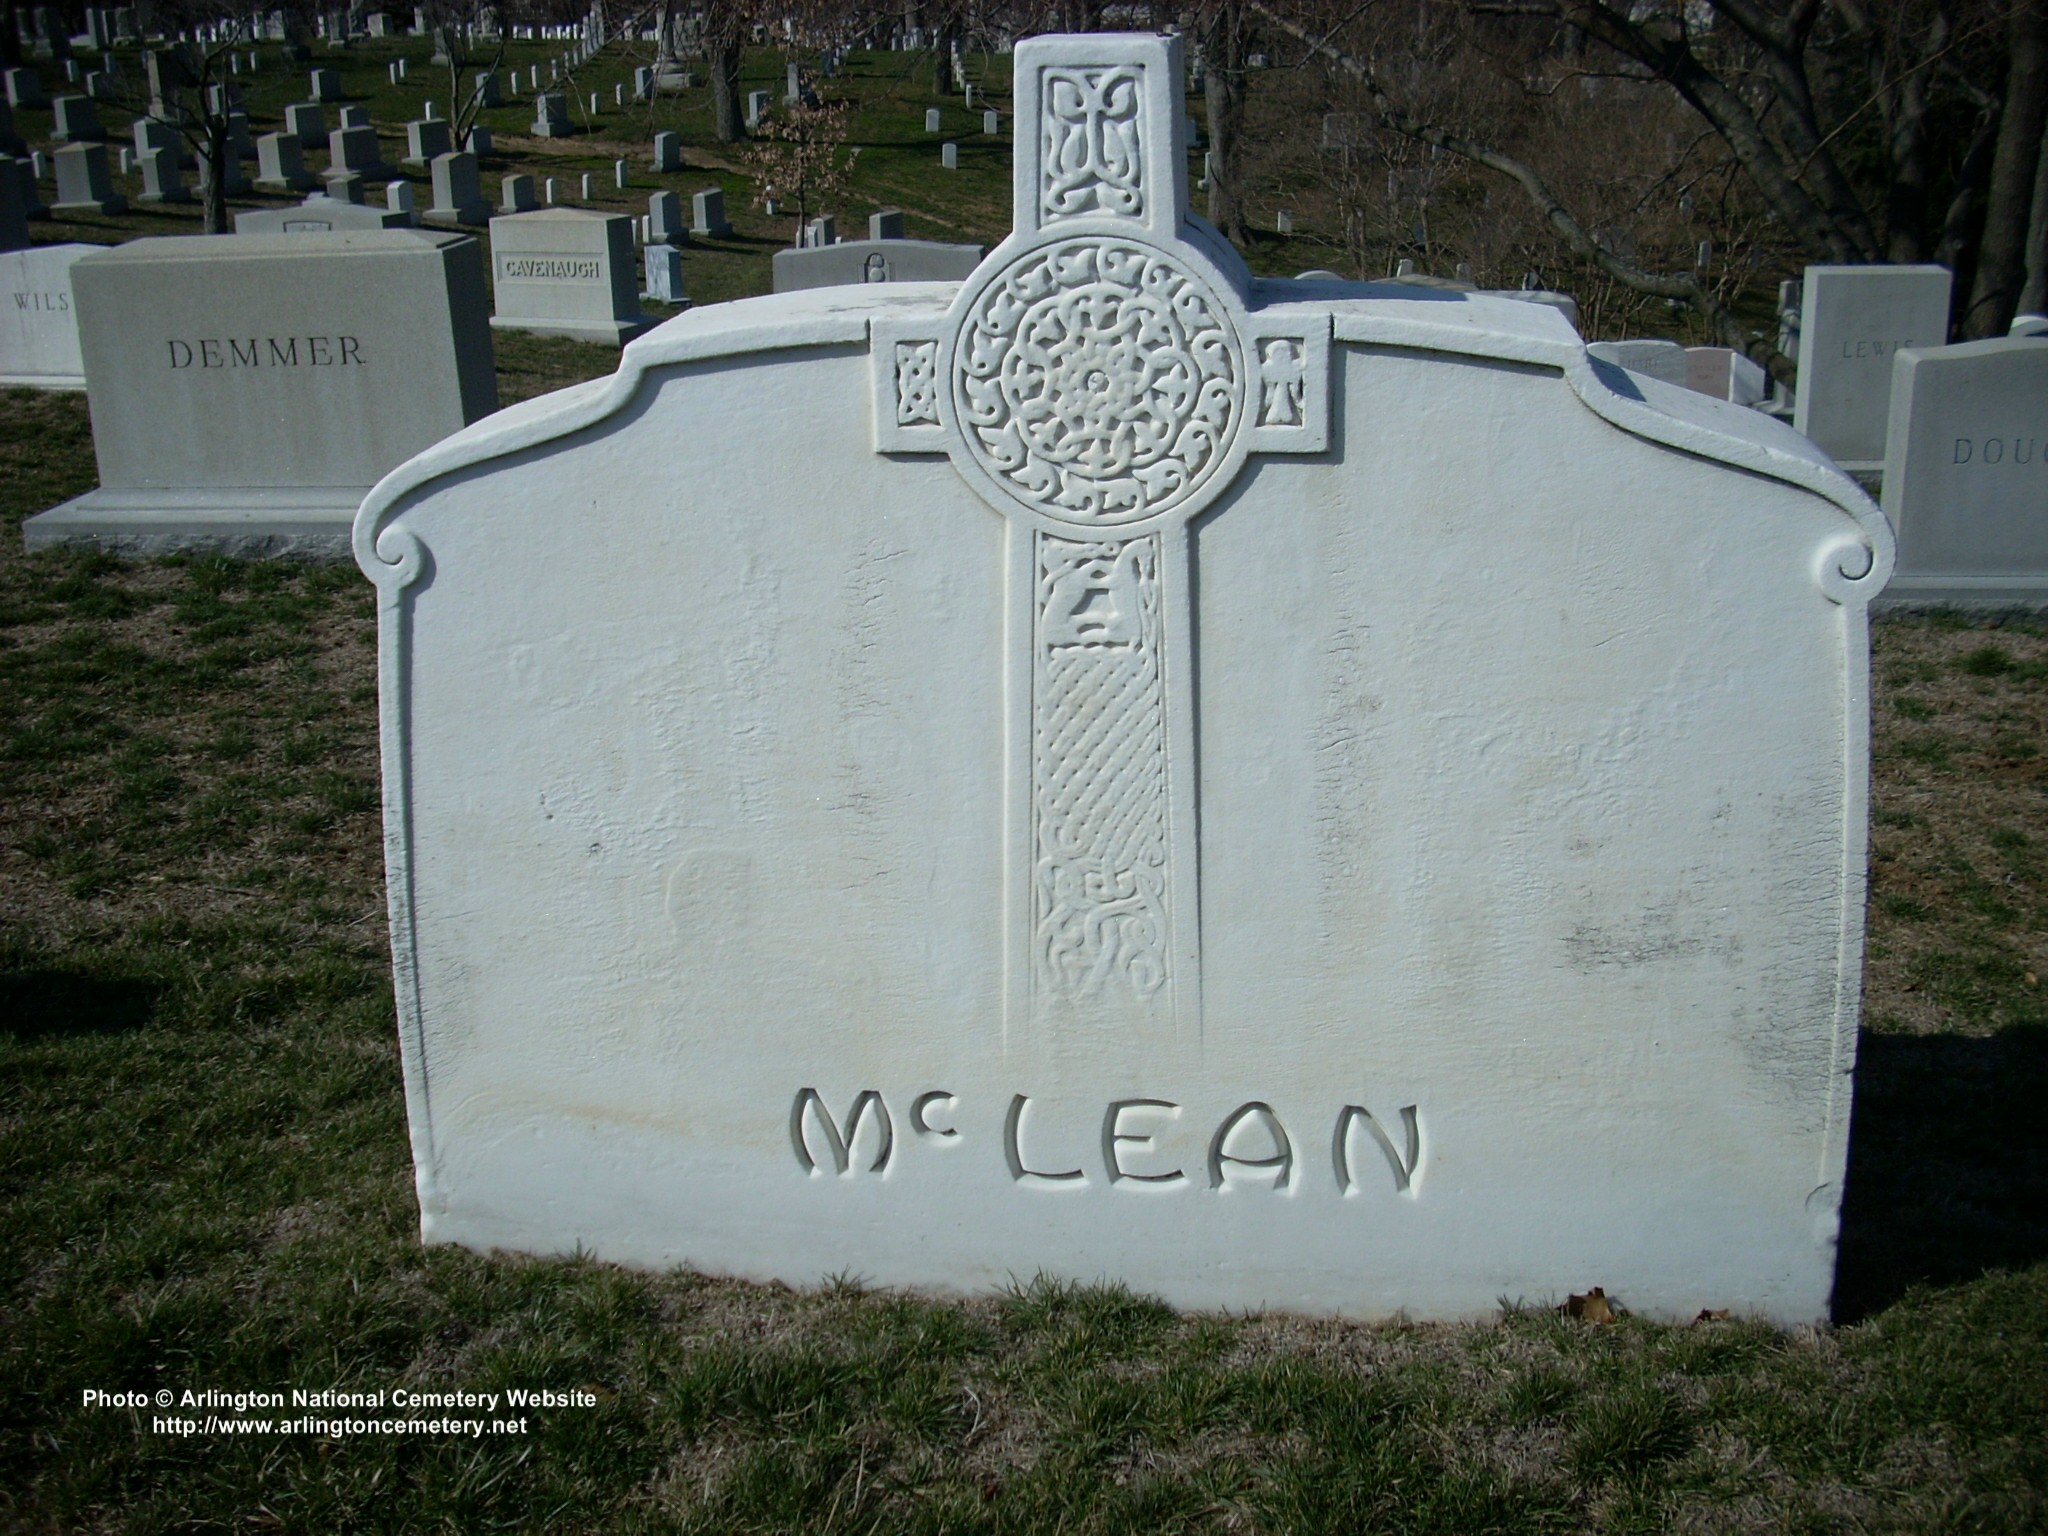 ridley-mclean-gravesite-march-2008-002